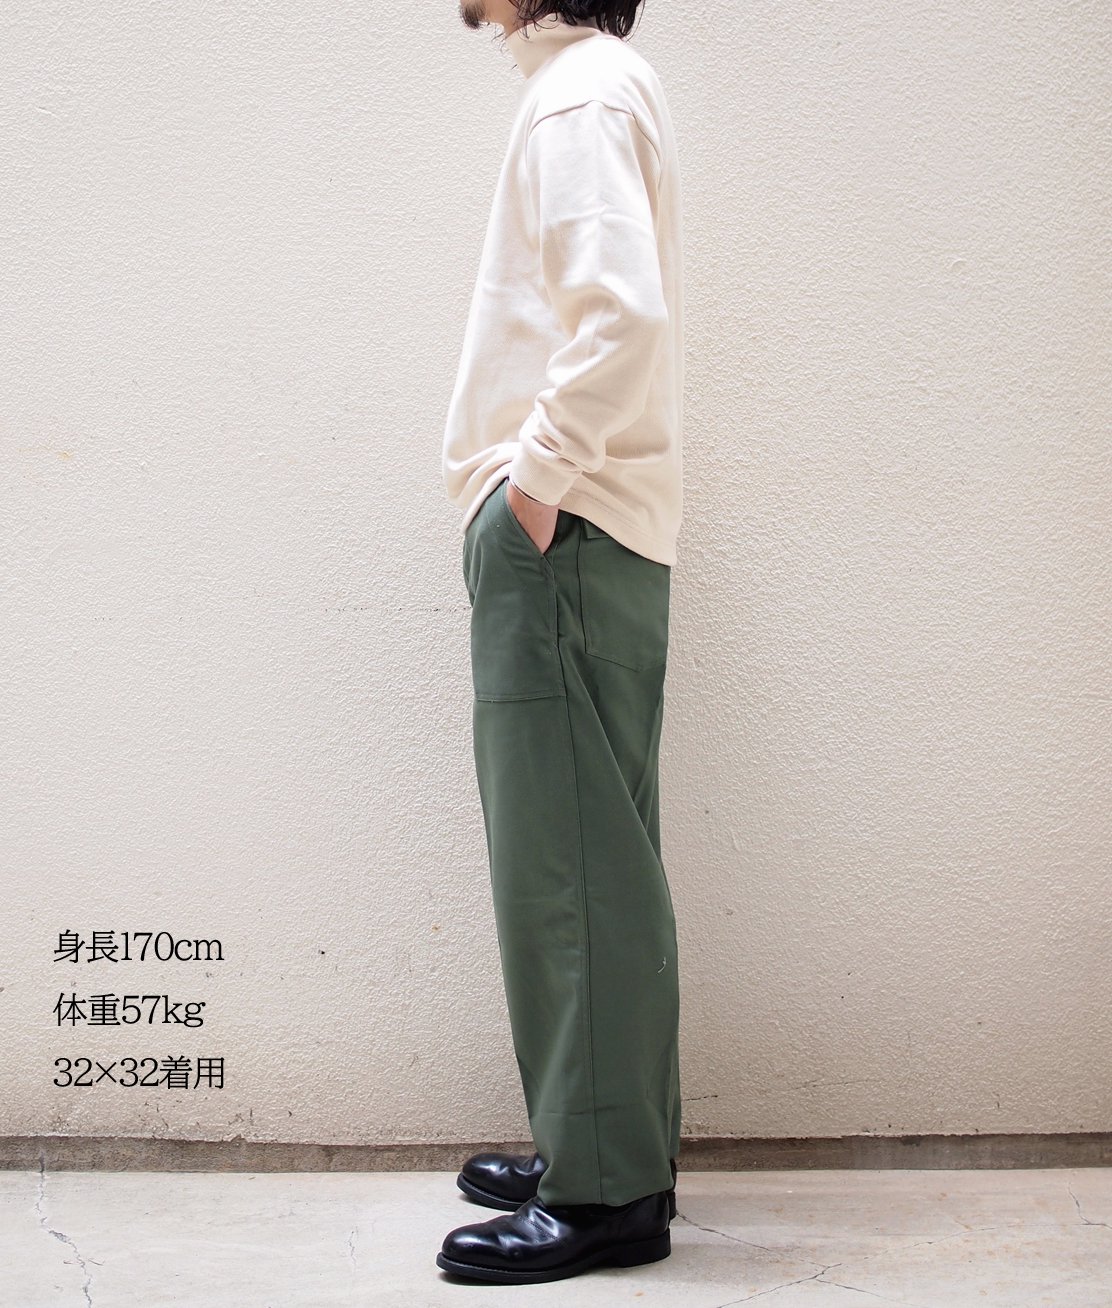 DEAD STOCK】US ARMY UTILITY TROUSERS - OLIVE GREEN 米軍 ベイカー